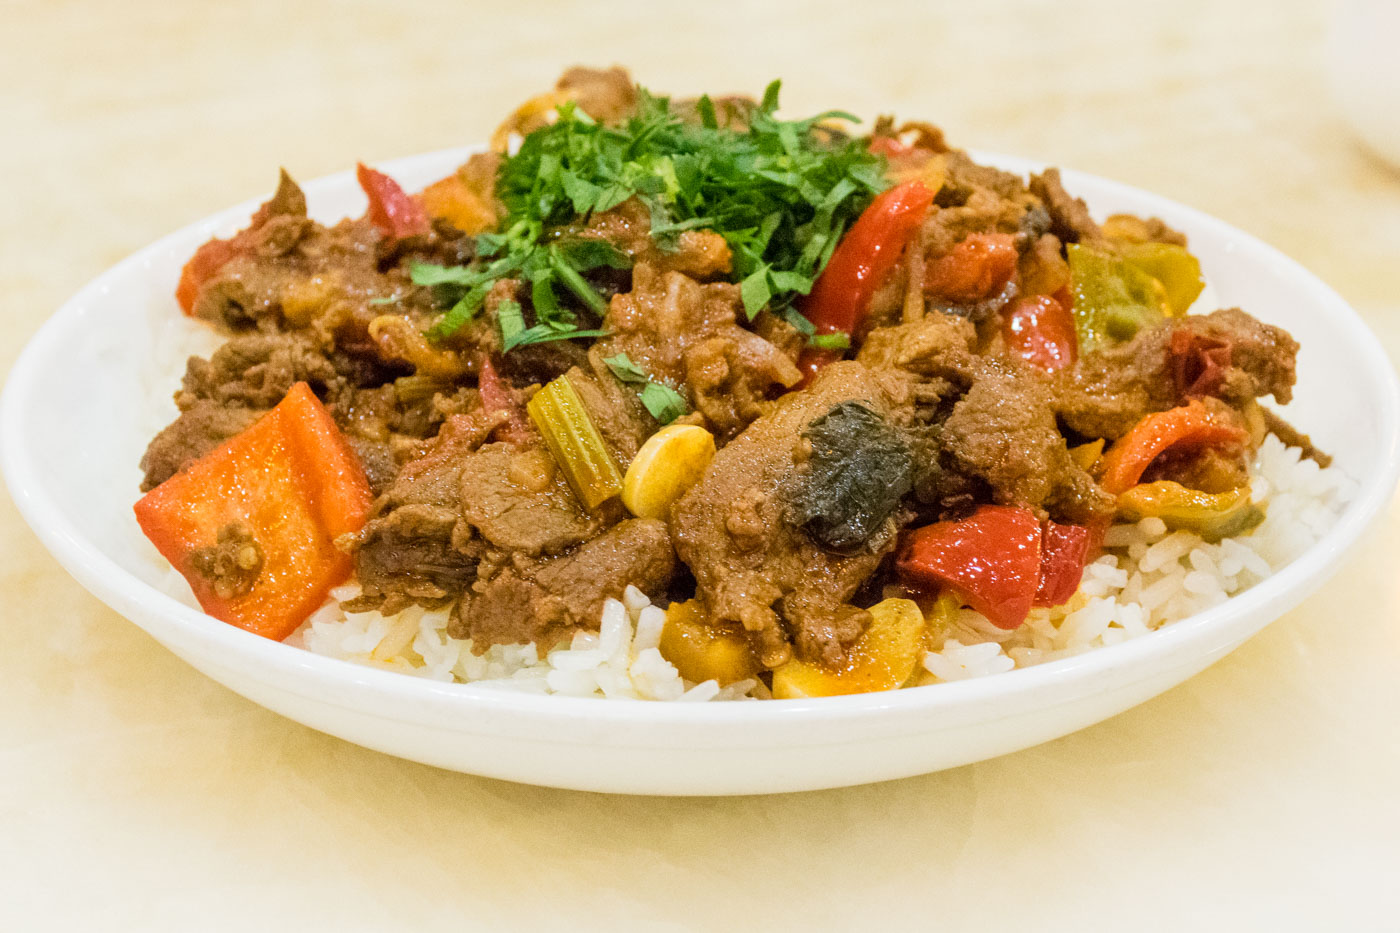 traditional Kyrgyzstan dish of rice, meat and vegetables